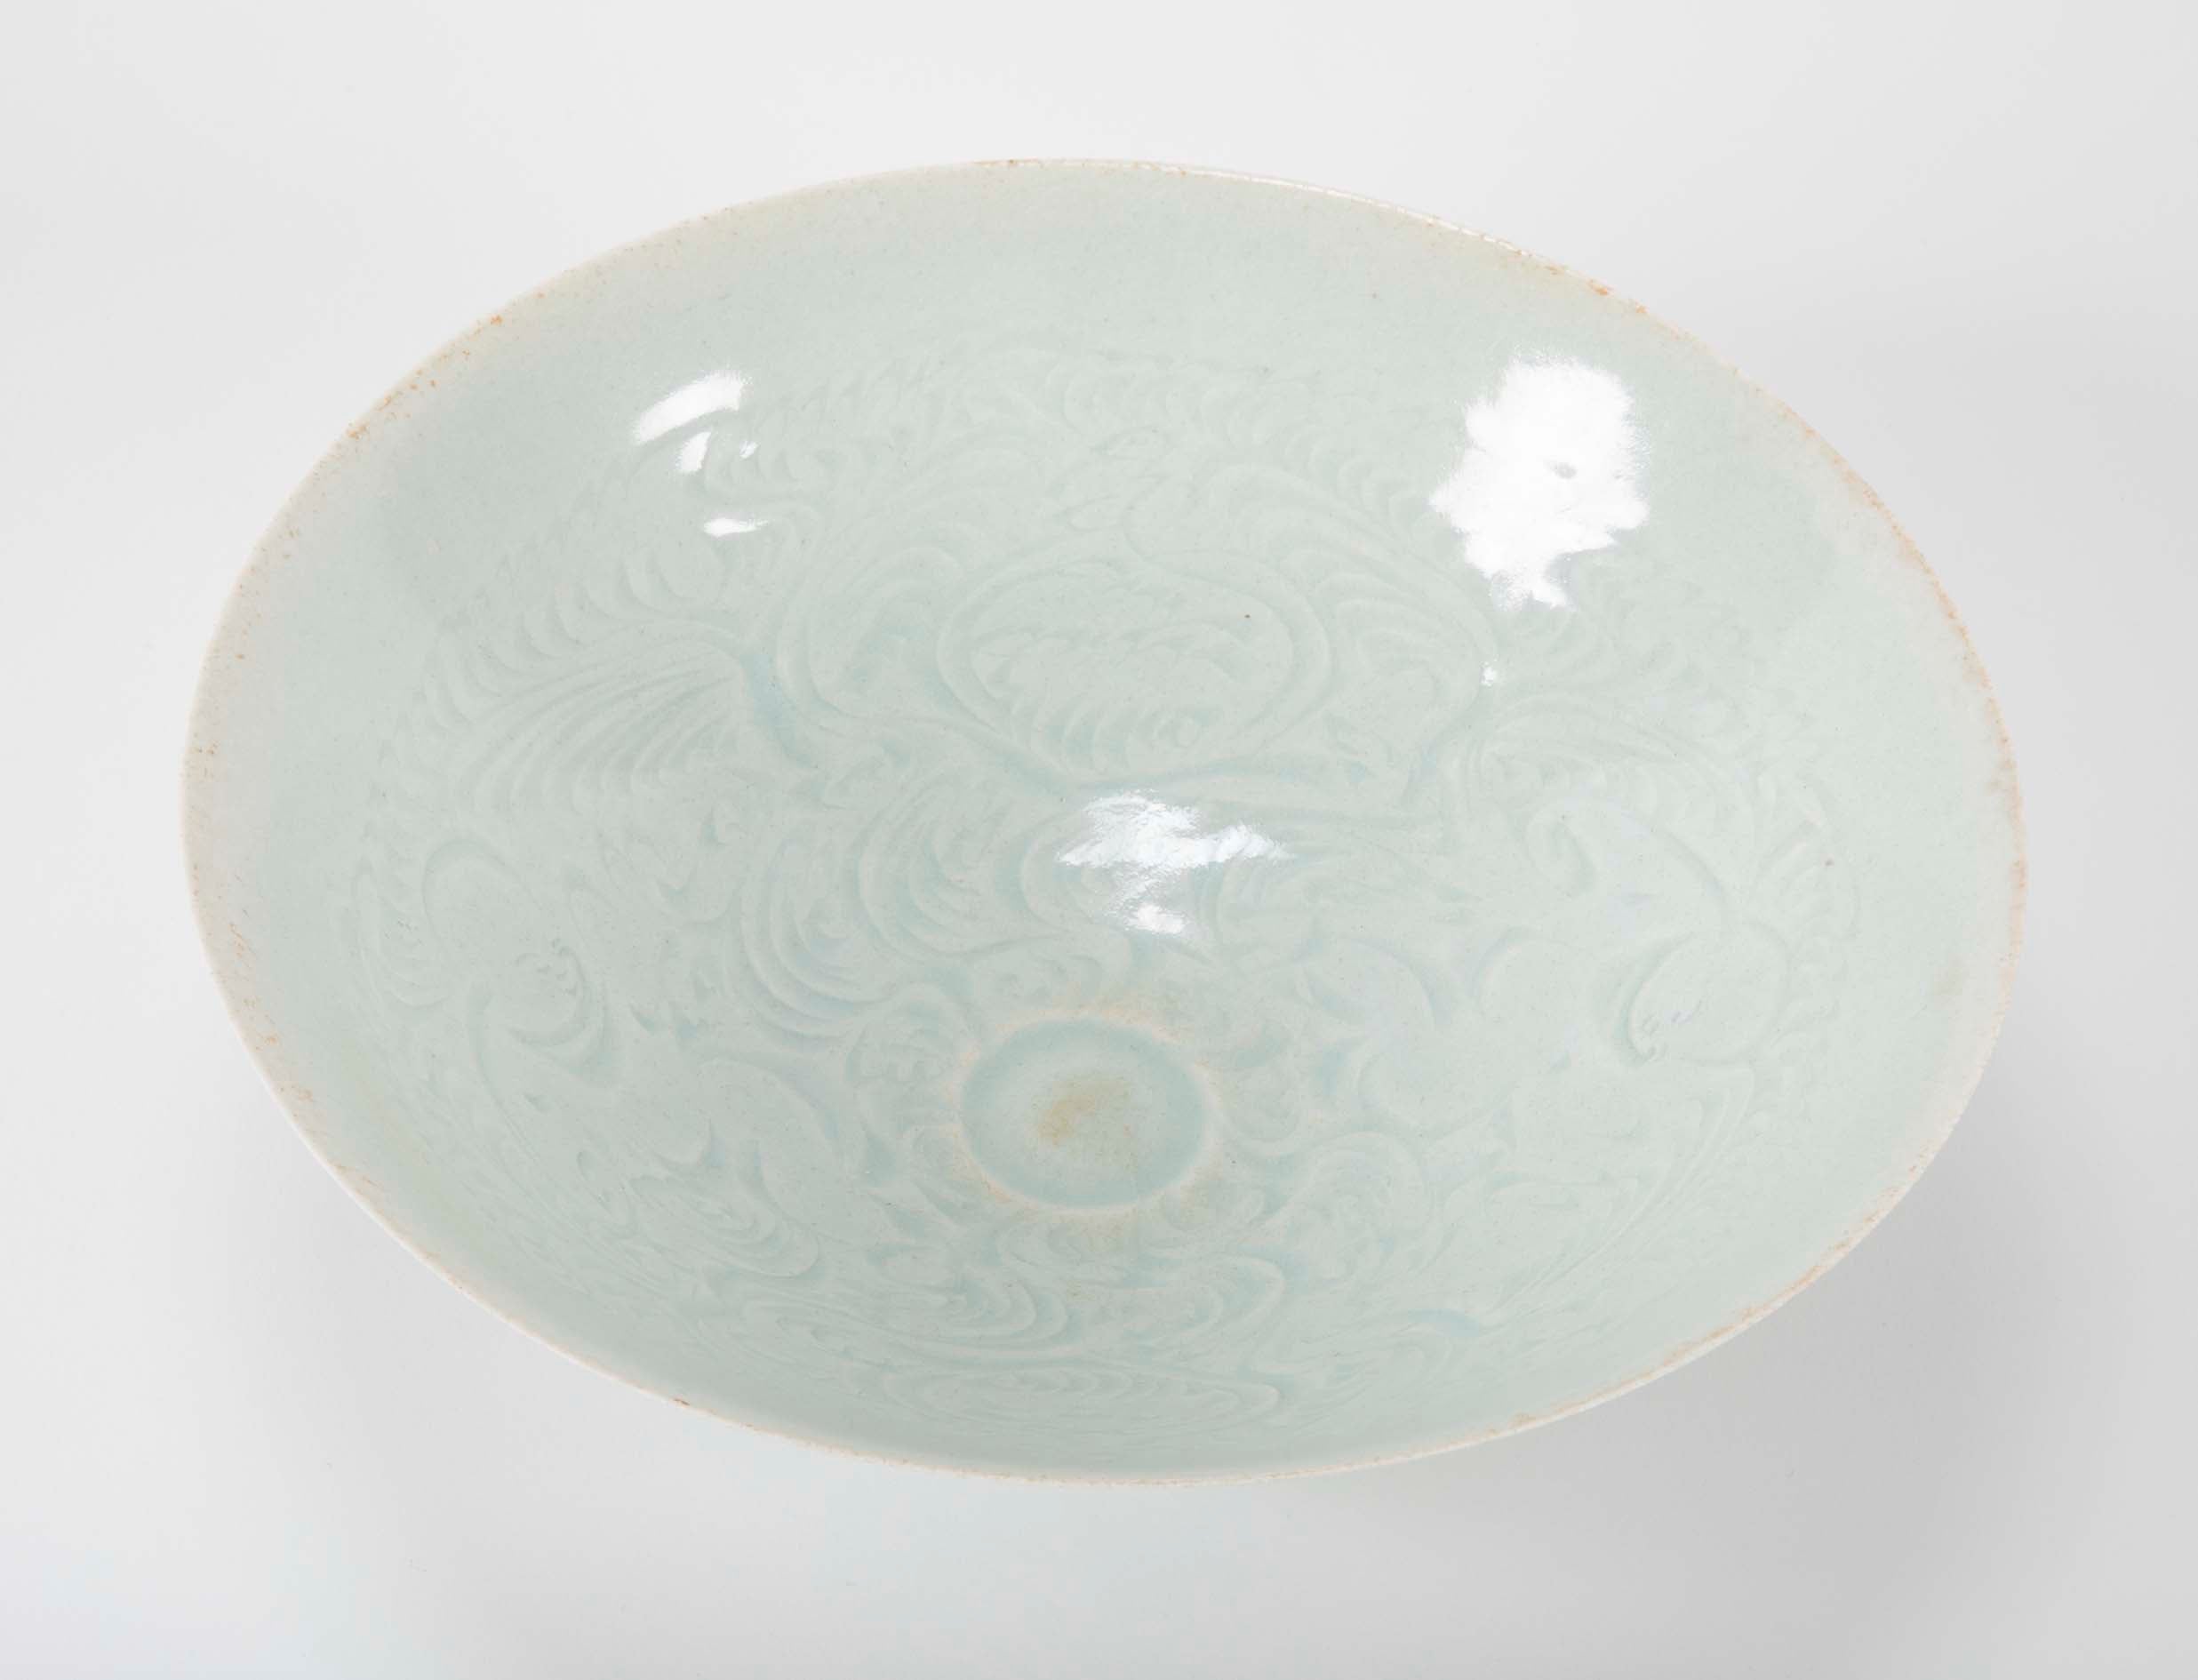 Exquisite Song Dynasty Qingbai Bowl with Pale Blue Glaze